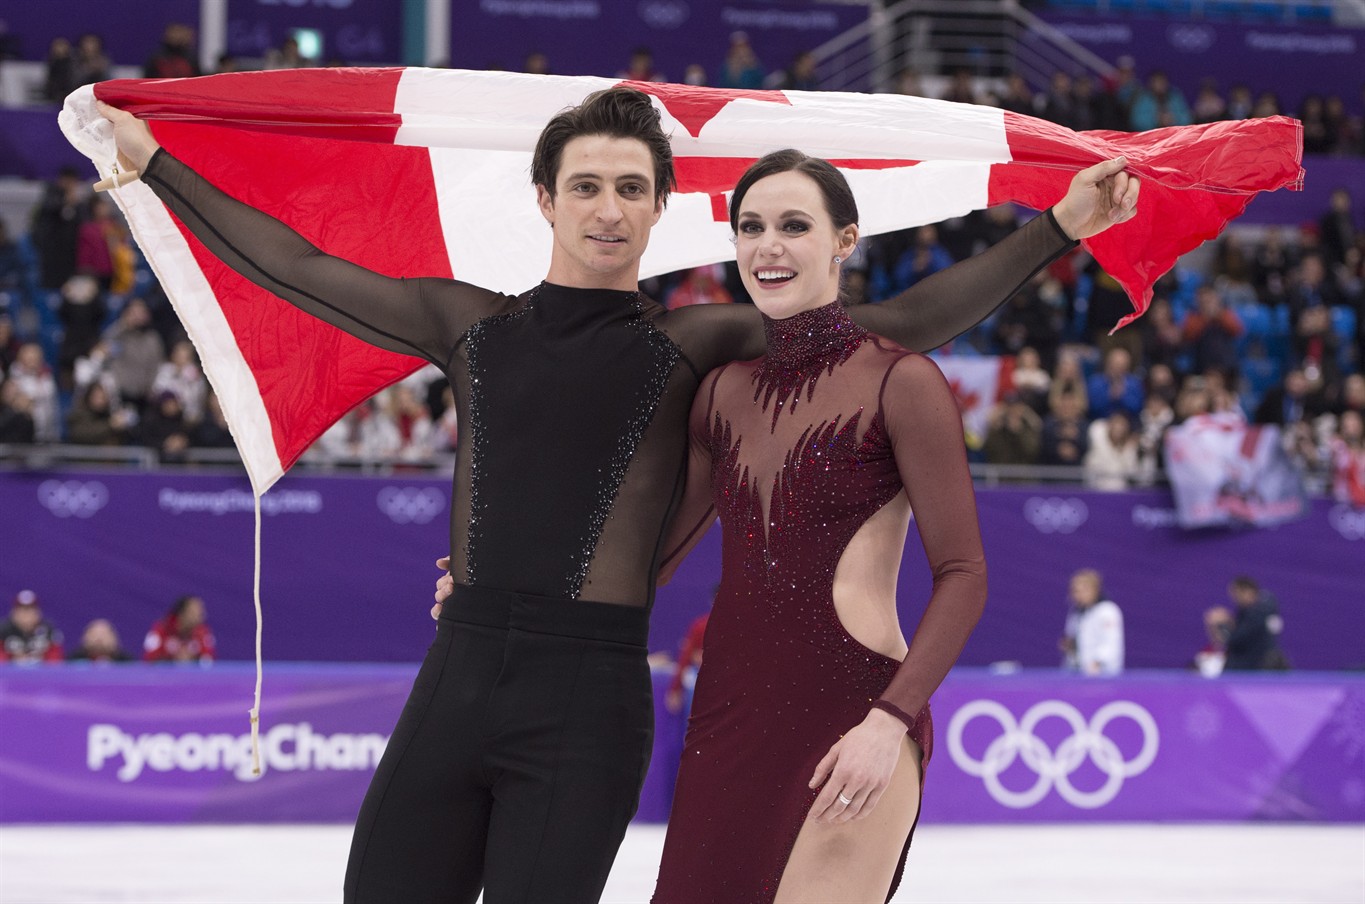 Tessa Virtue and Scott Moir performing in Kitchener as part of 